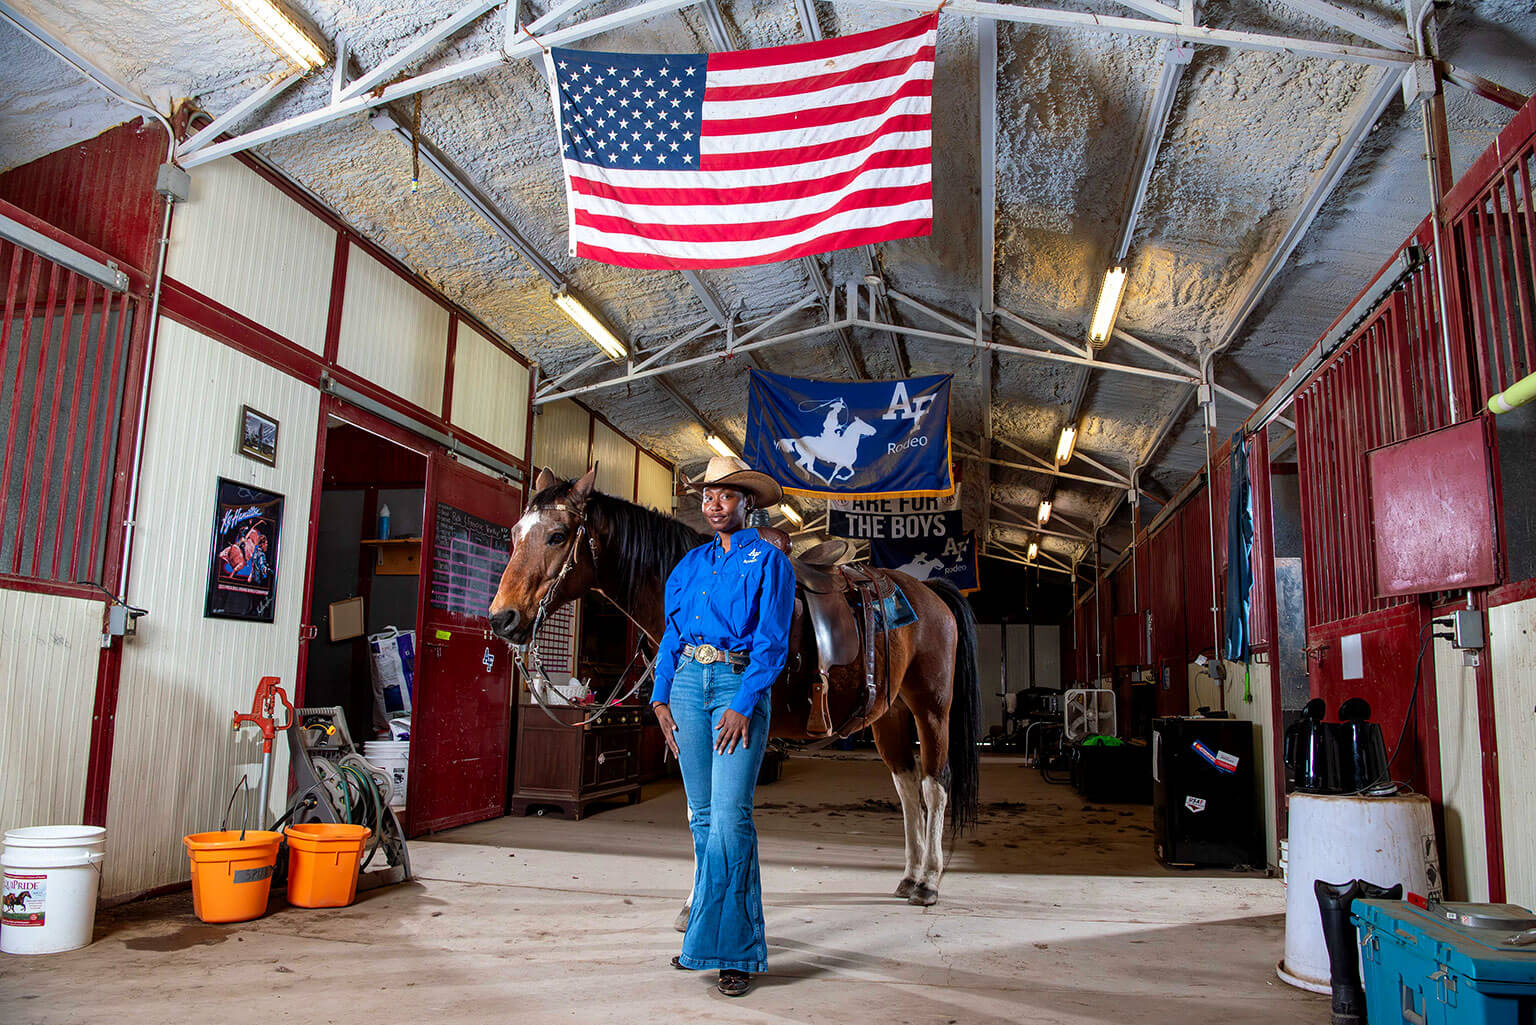 Cadet 3rd Class Lauryn Mitchell poses in front of her horse at the U.S. Air Force Academy Rodeo Club.